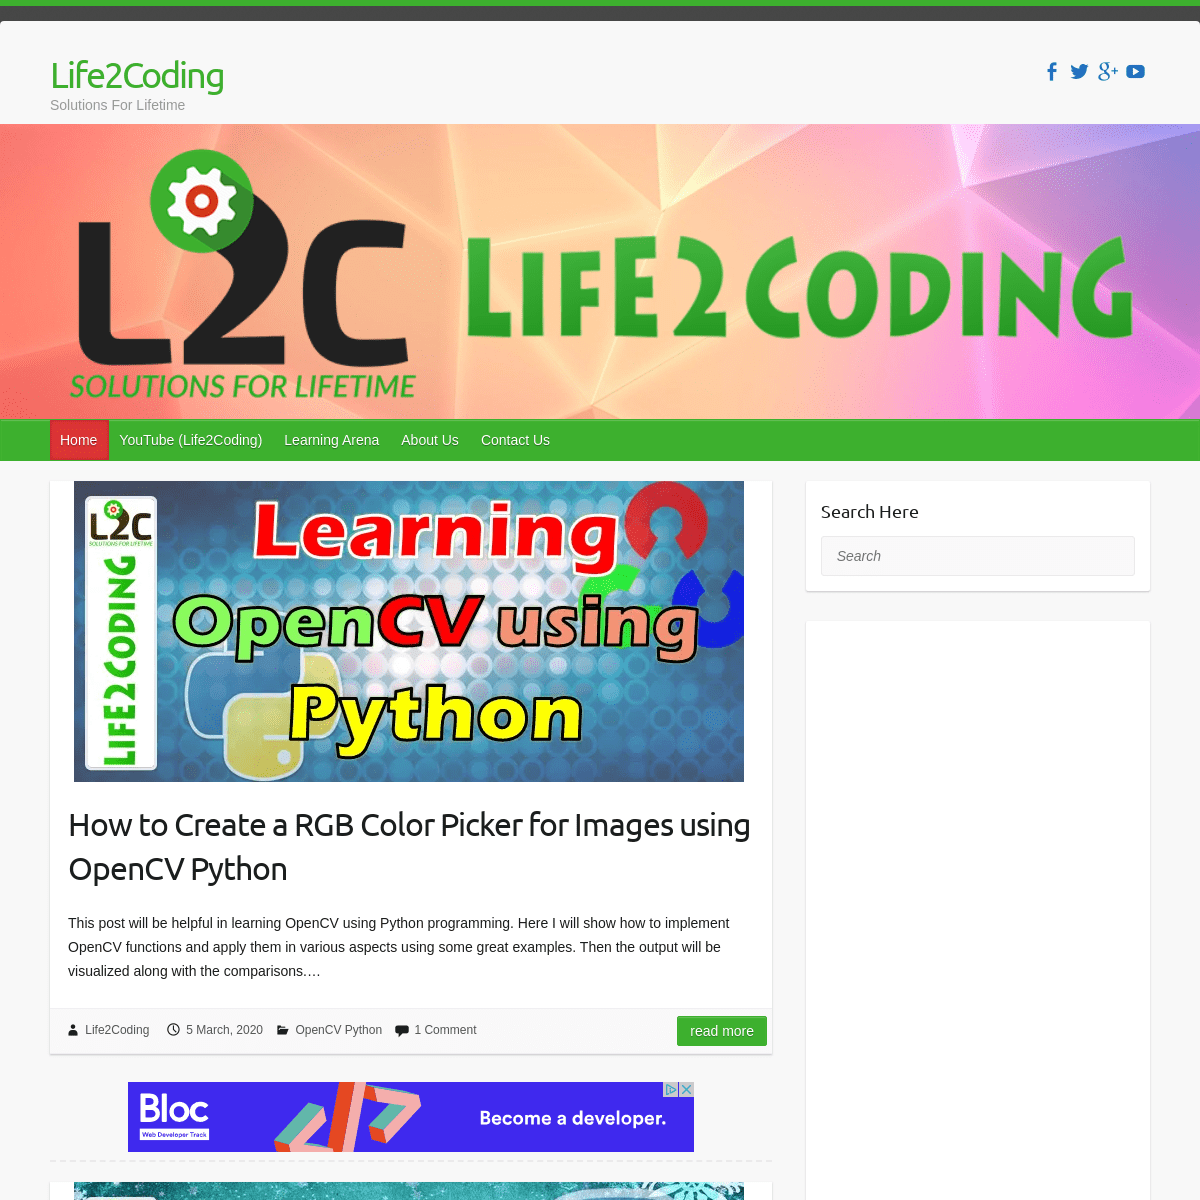 A complete backup of life2coding.com